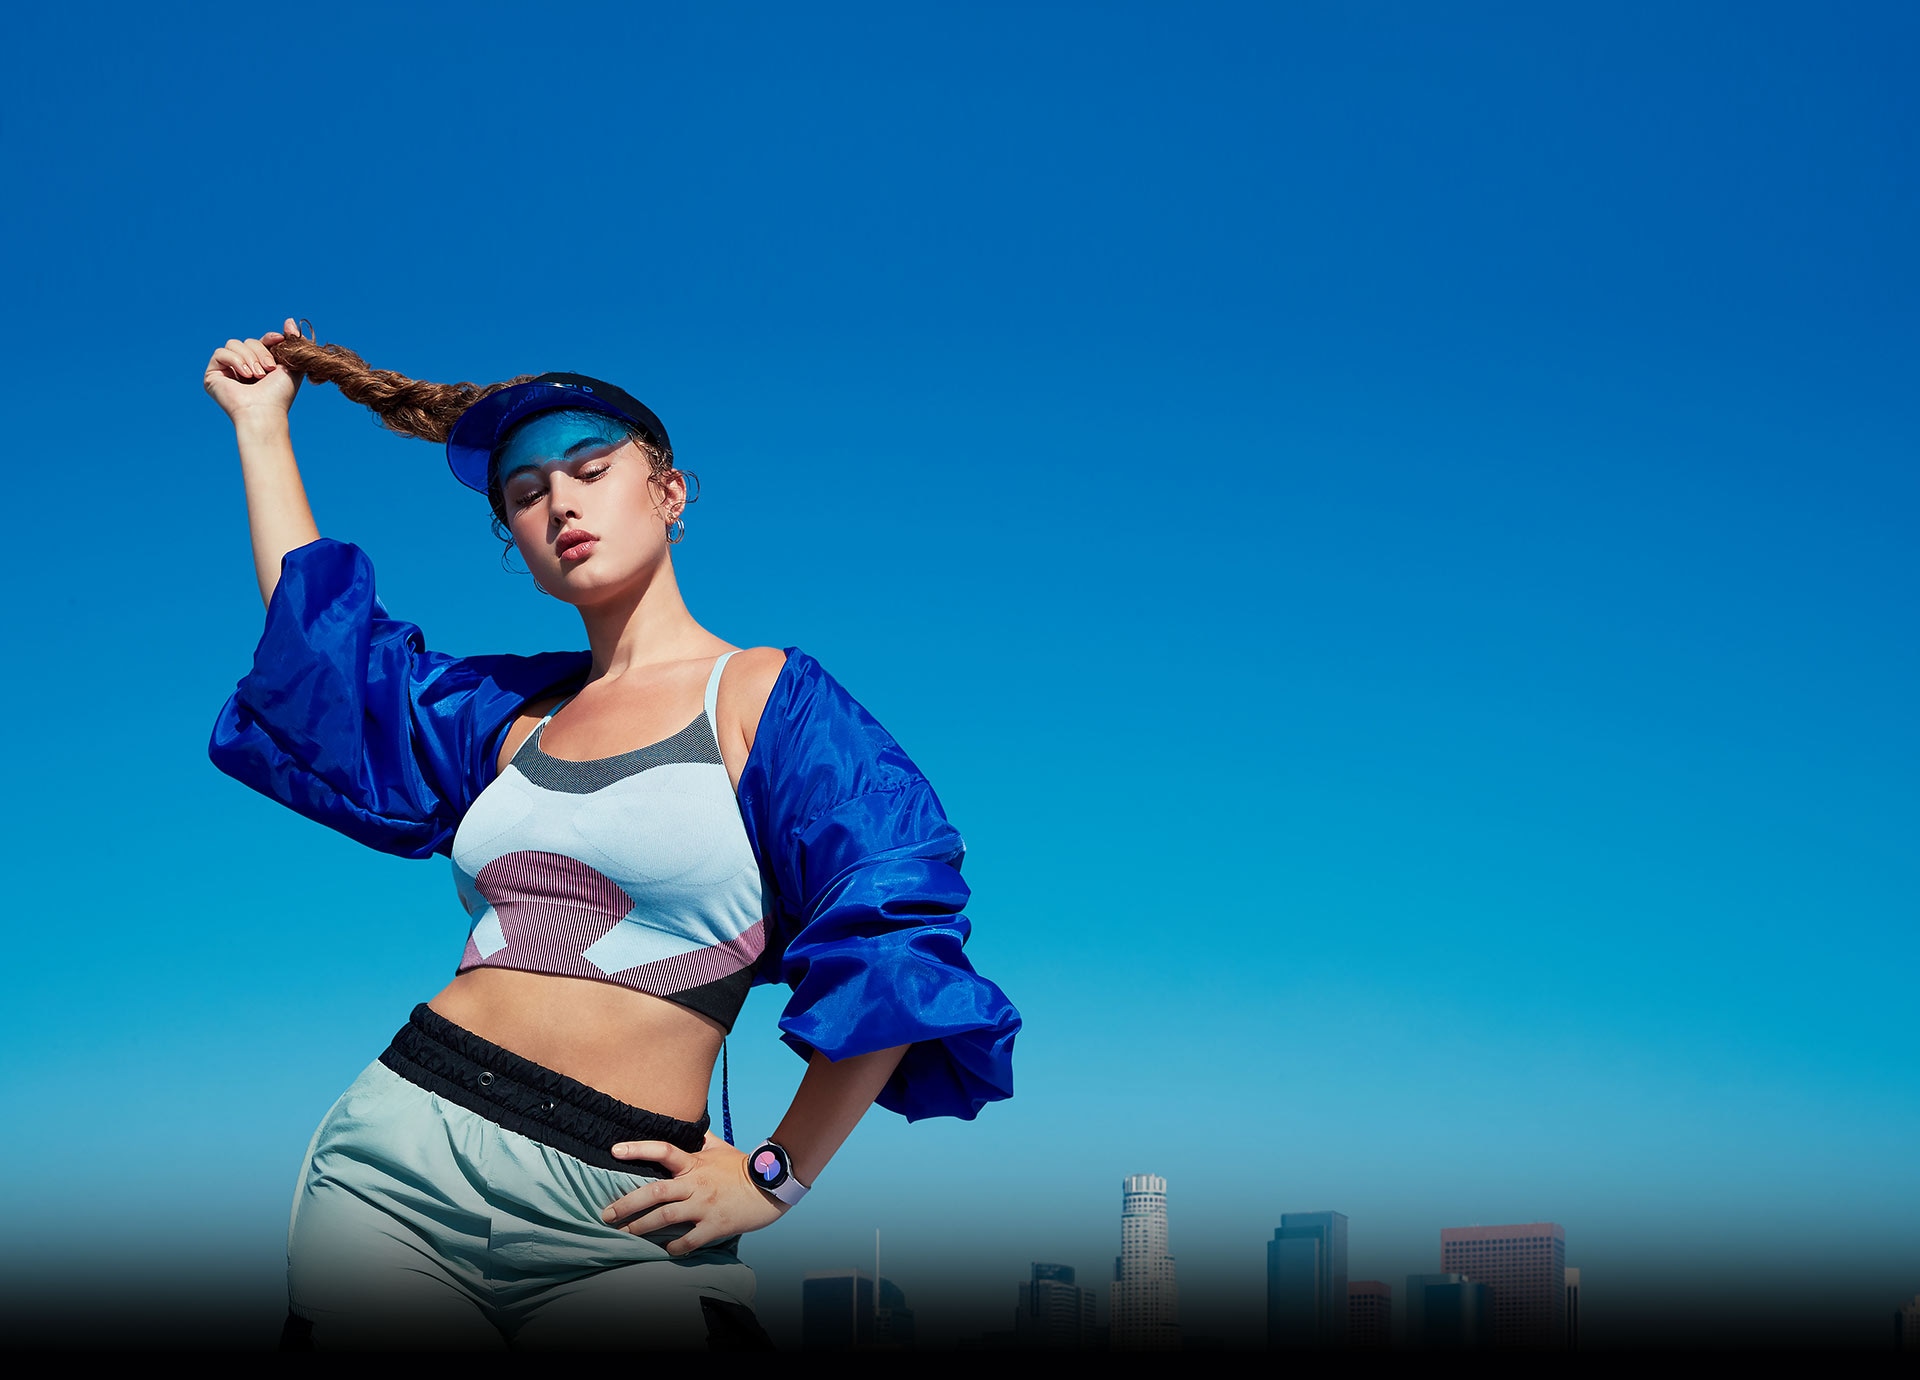 A woman striking a pose outdoors in front of the city skyline wearing a blue outfit with a Galaxy Watch5 on her wrist showing the time as '5' in a blue and pink gradient.